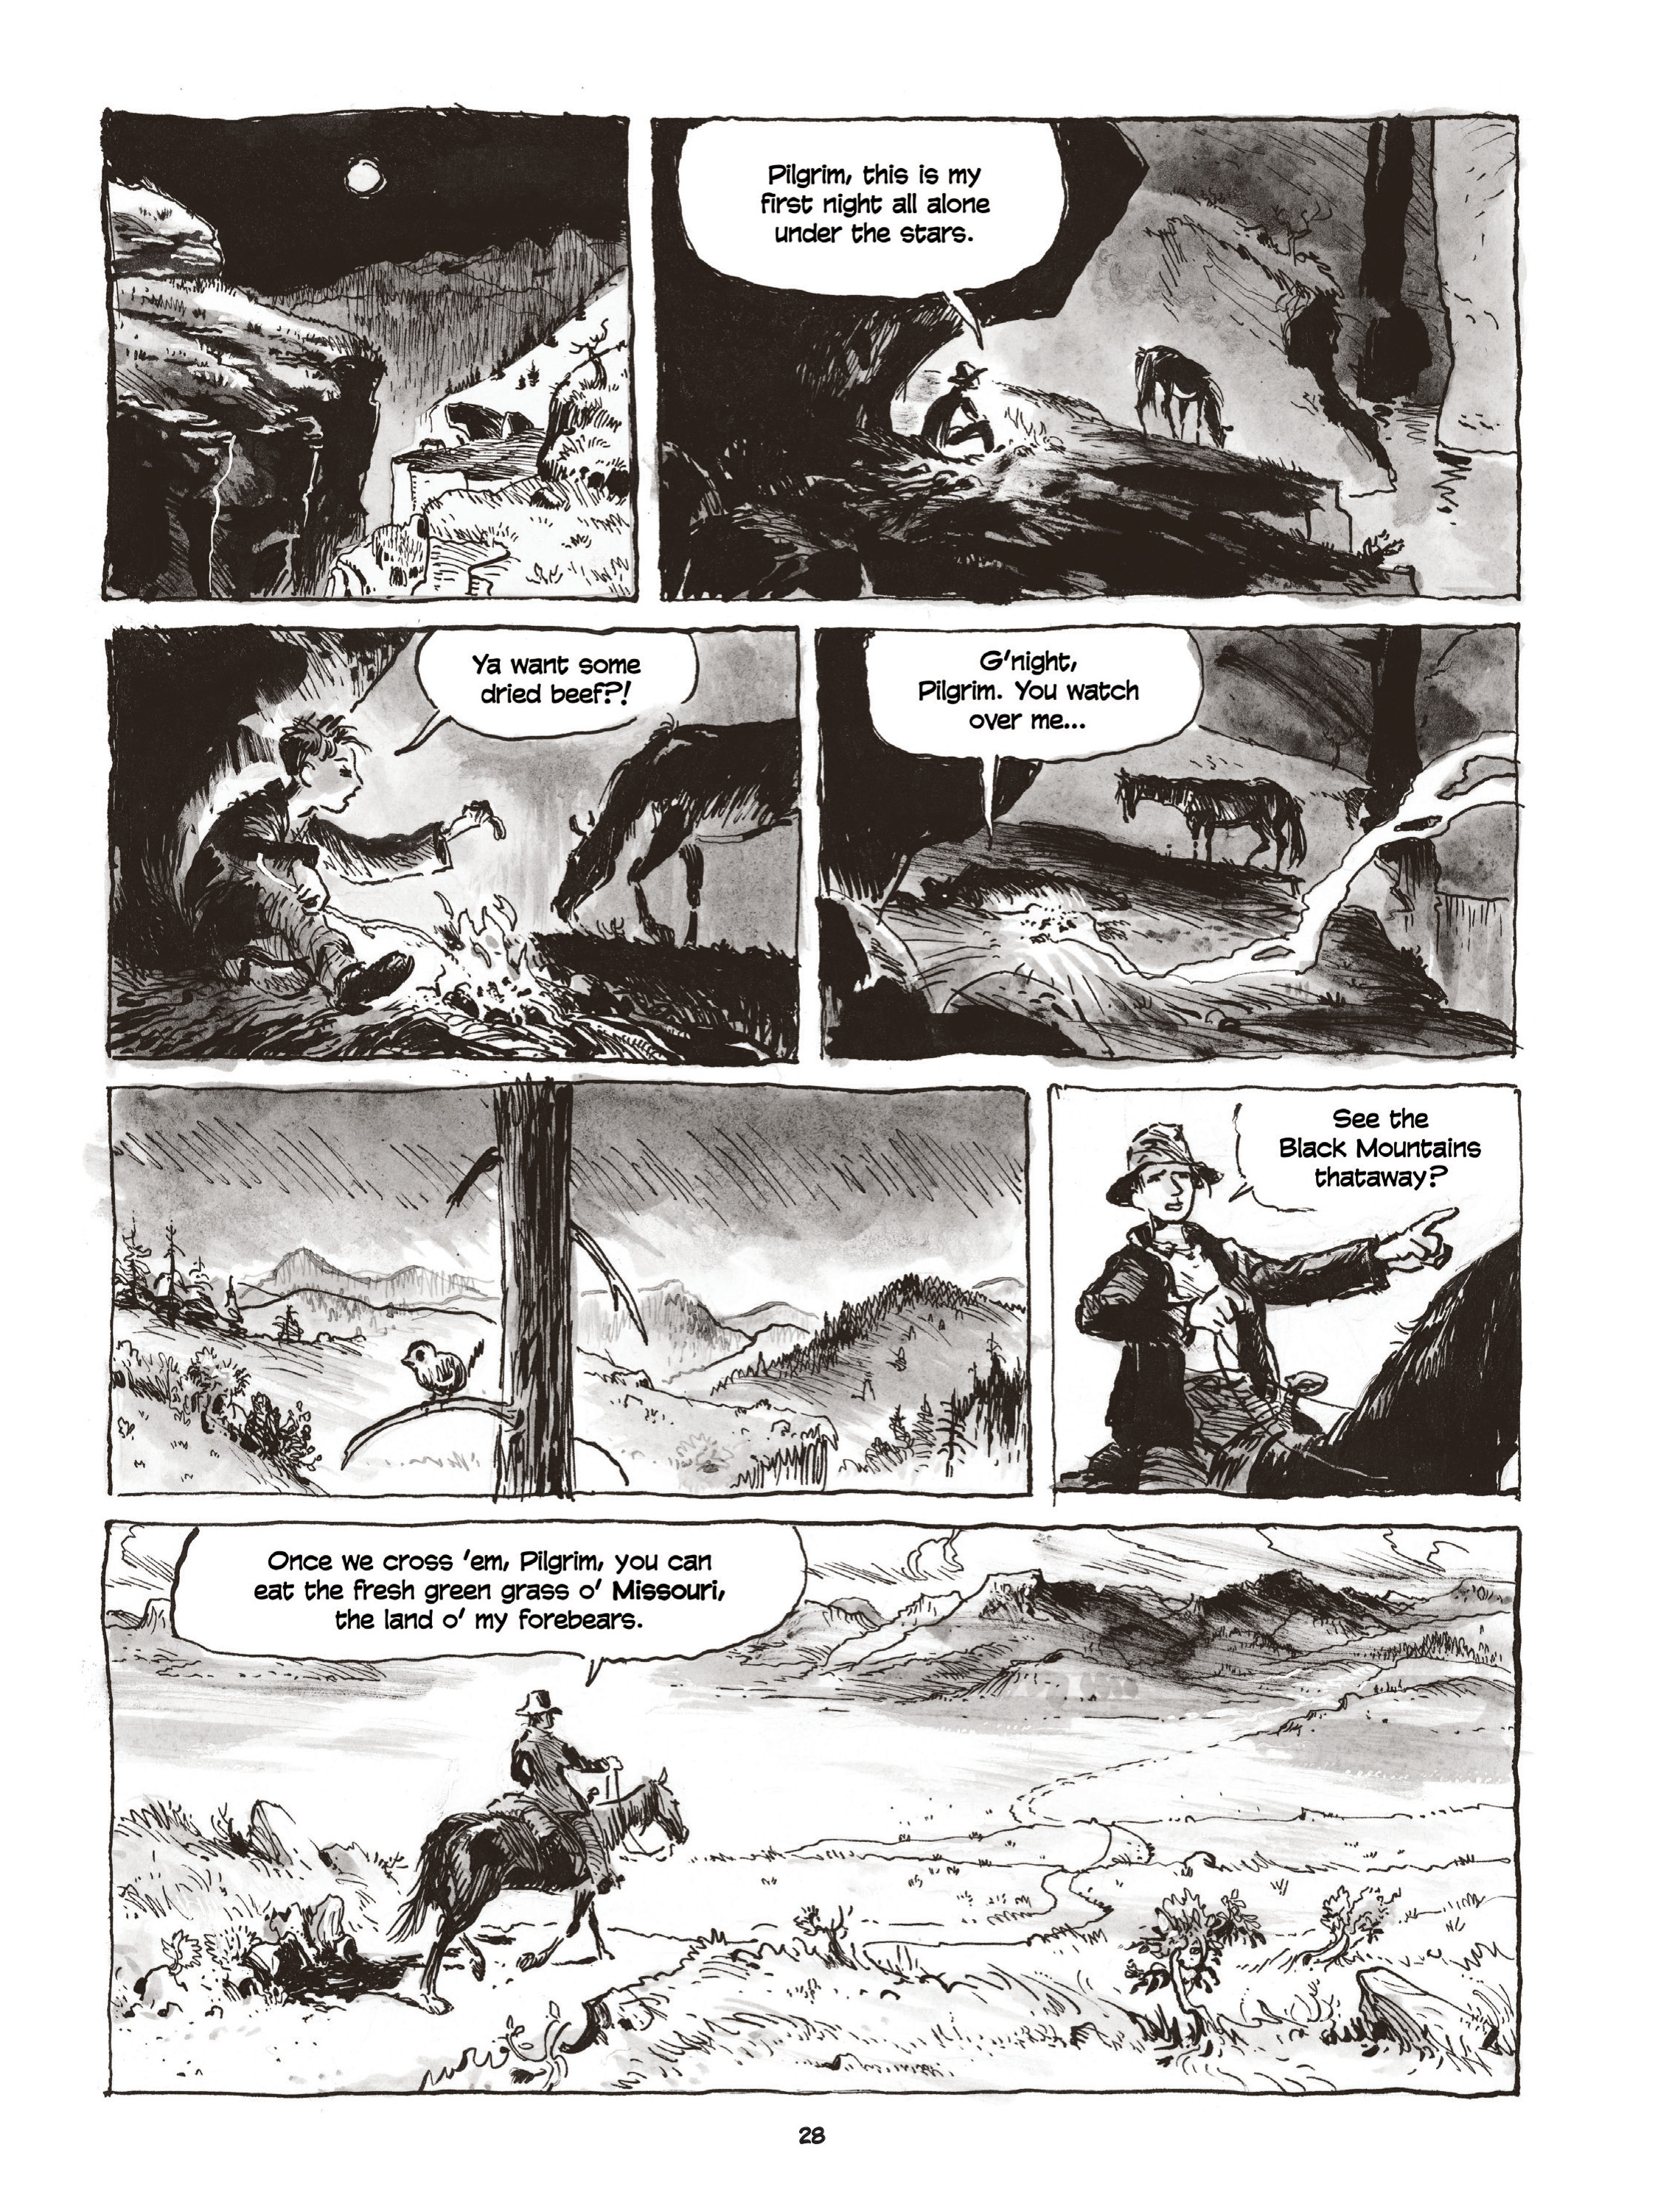 Read online Calamity Jane: The Calamitous Life of Martha Jane Cannary comic -  Issue # TPB (Part 1) - 28